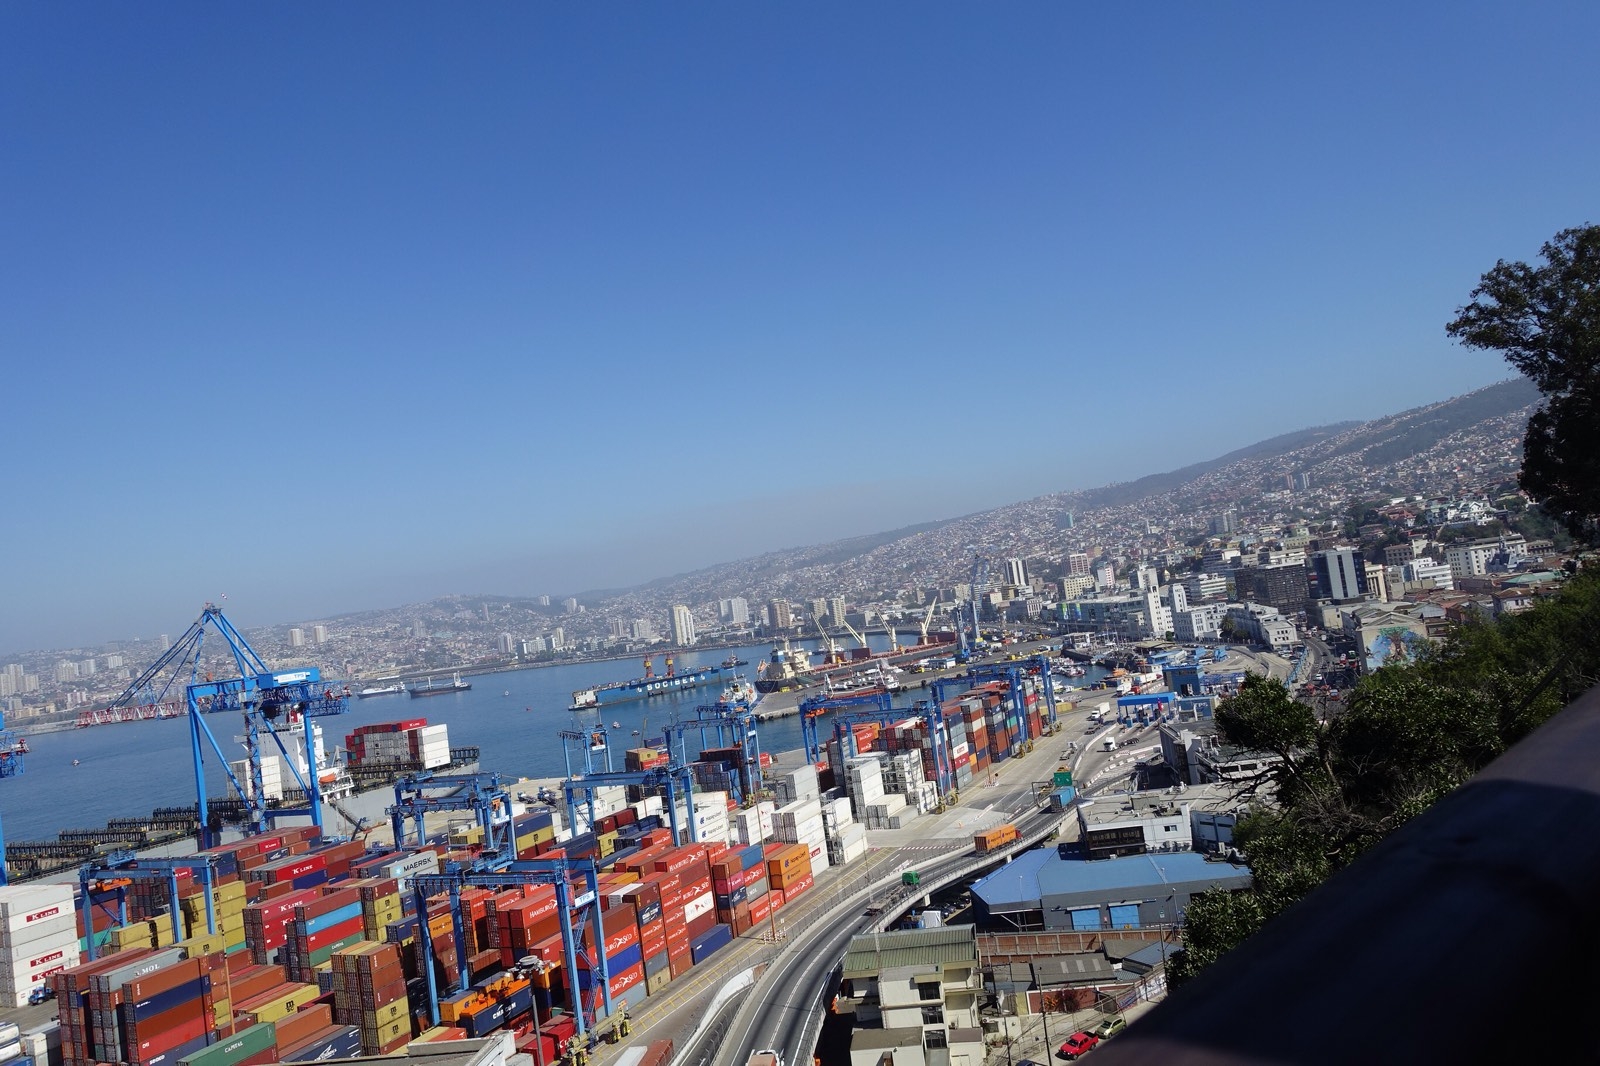 Container port, old town, new town, maybe Viña del Mar and points beyond 